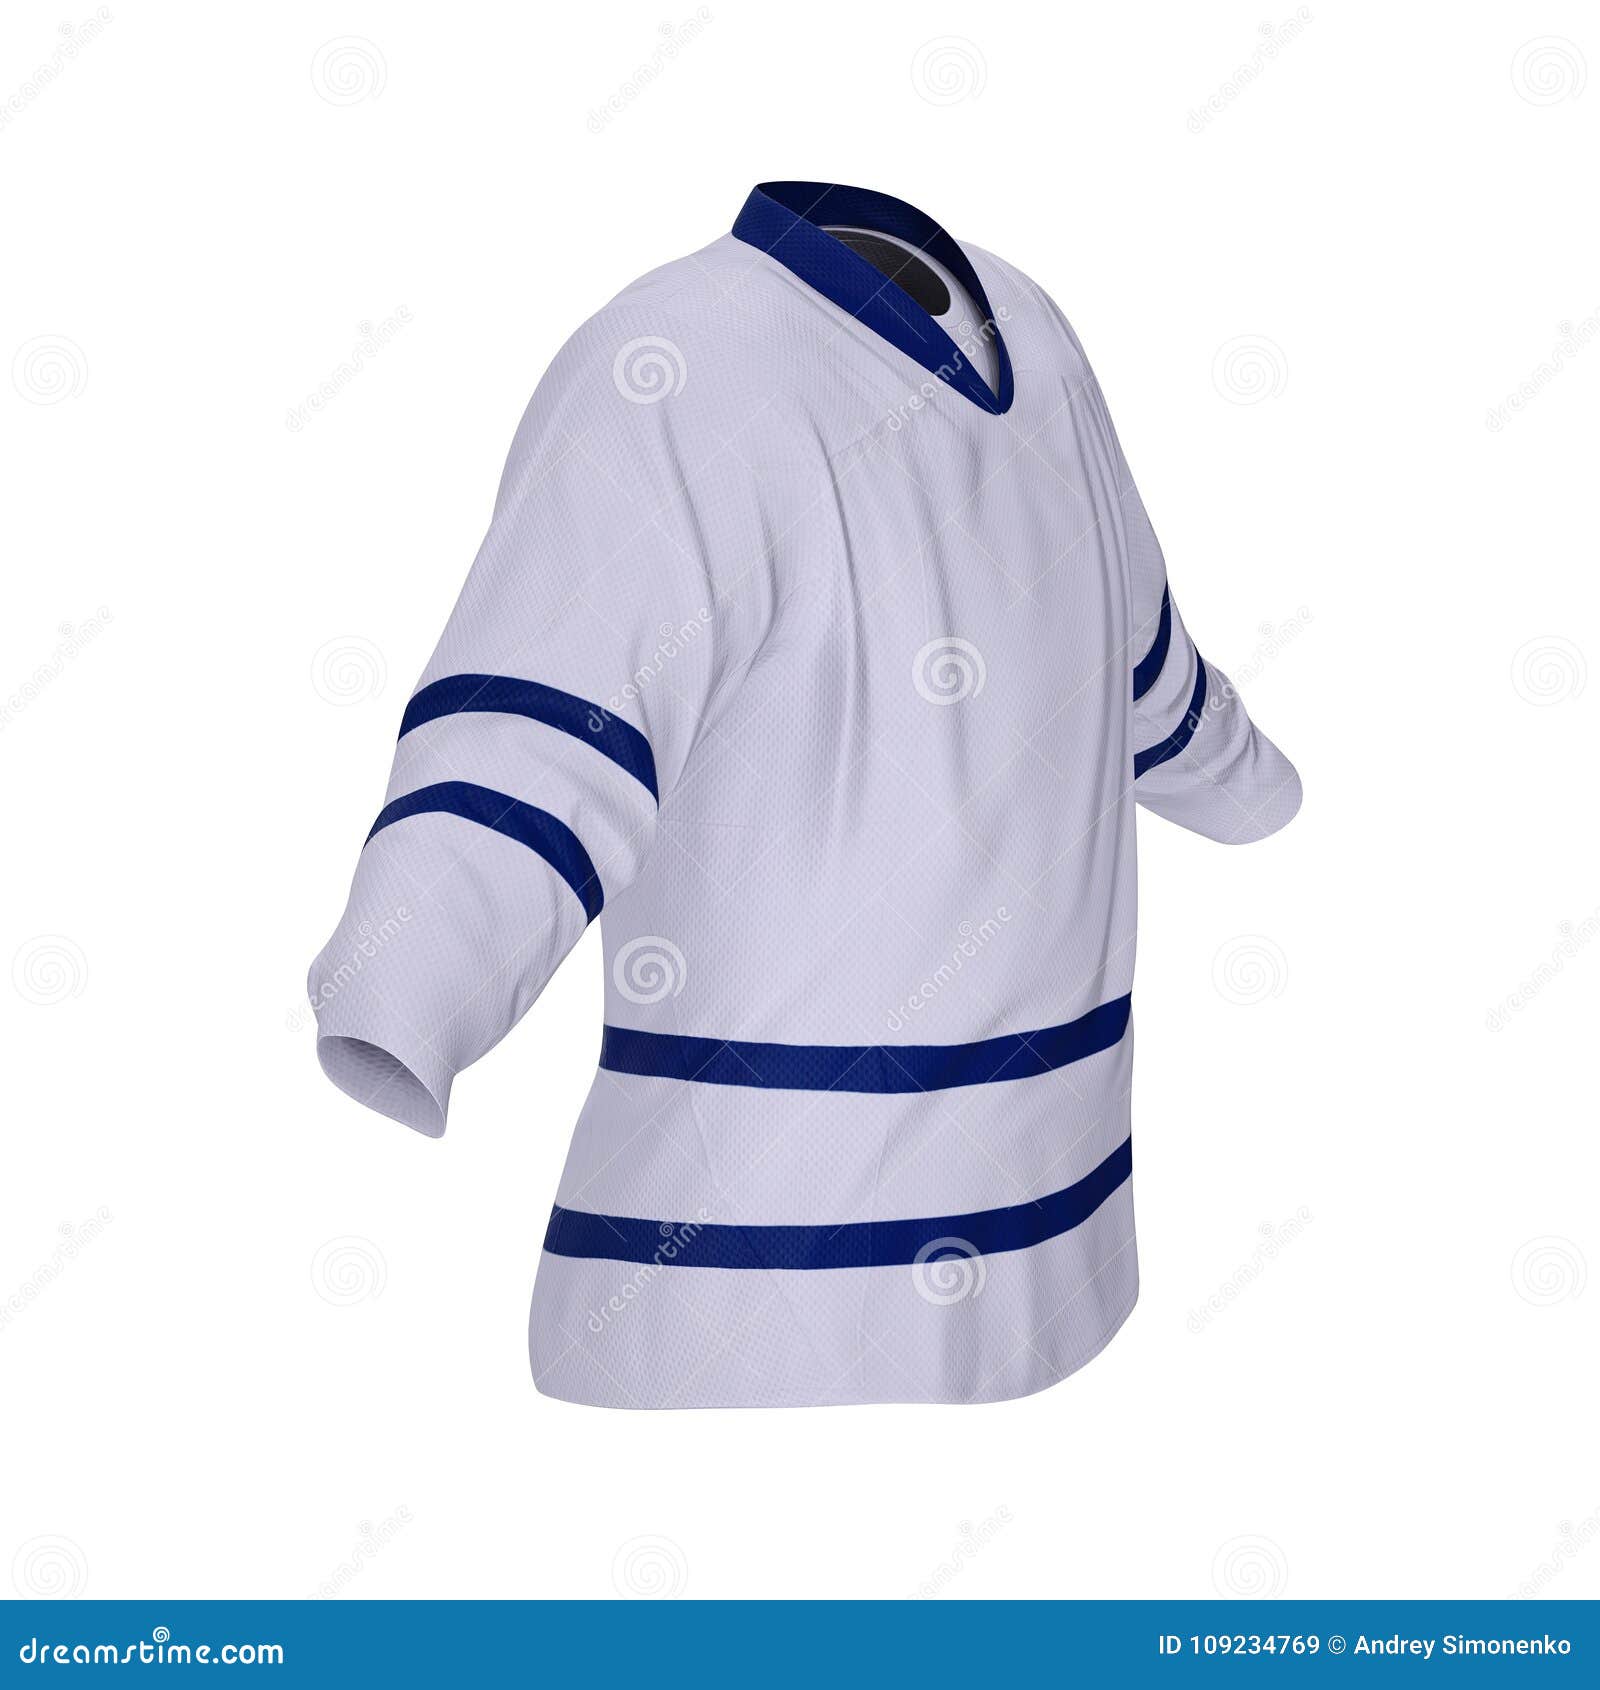 Hockey Gear on White. Front View. 3D Illustration Stock